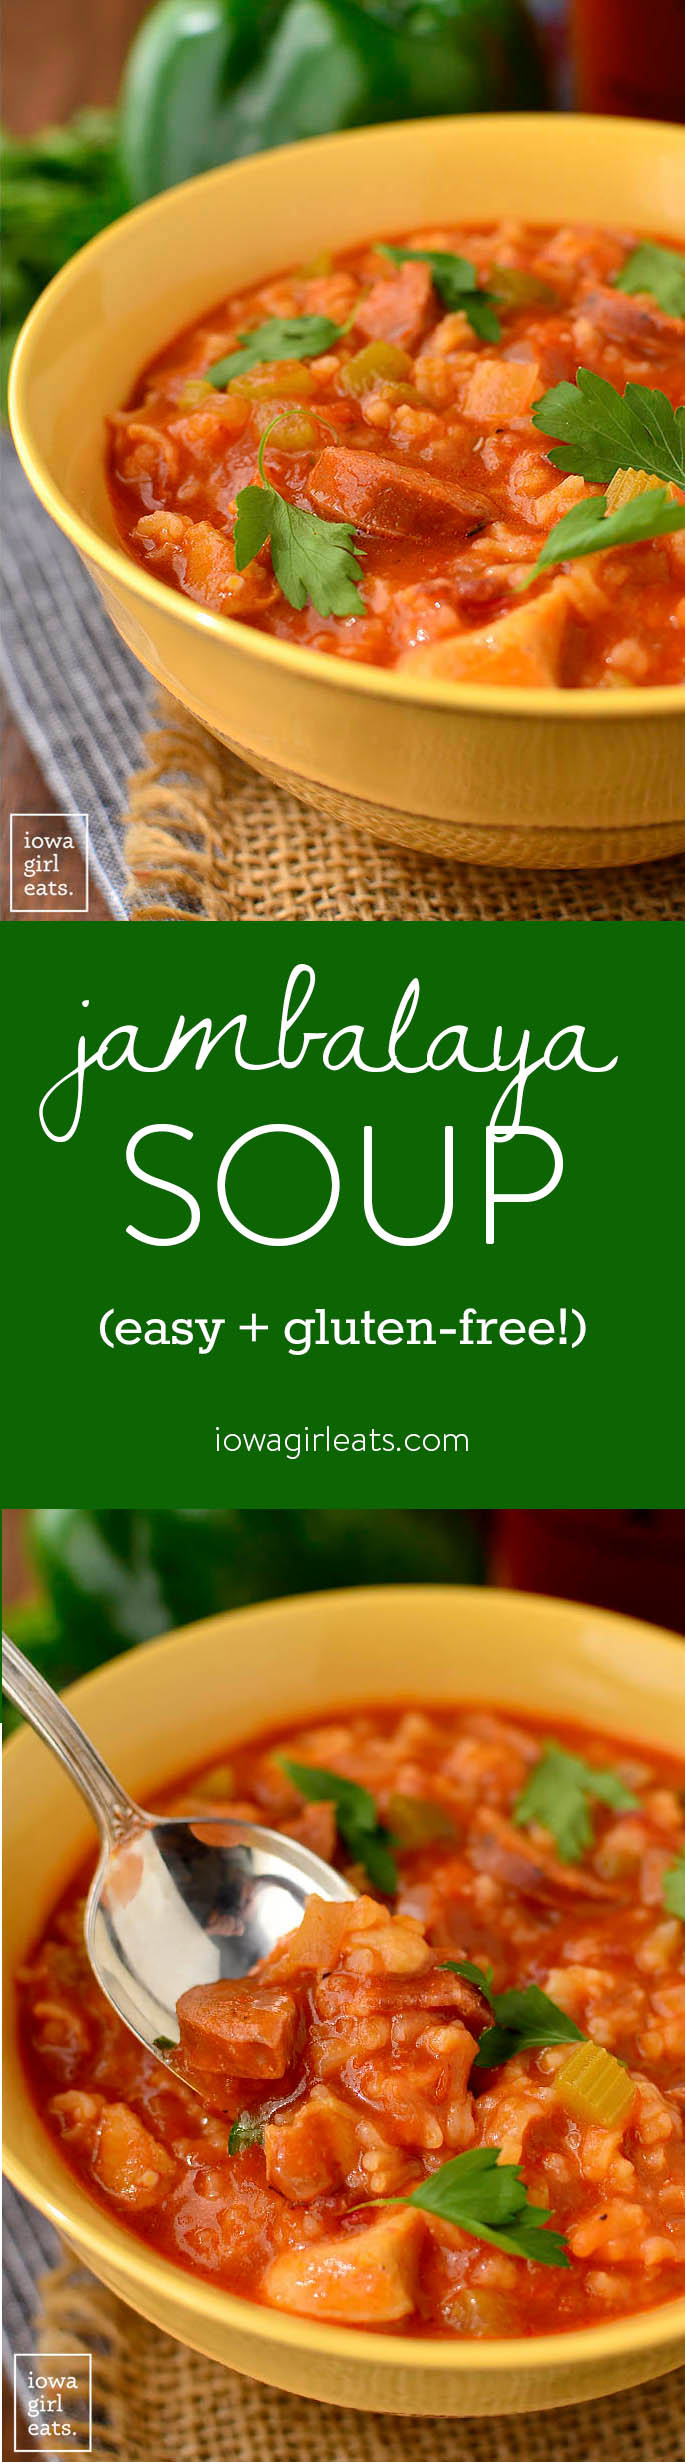 Jambalaya Soup is an easy and soul-satisfying gluten-free soup recipe. Slightly thick and perfectly spicy, it's a delicious taste of the south! | iowagirleats.com